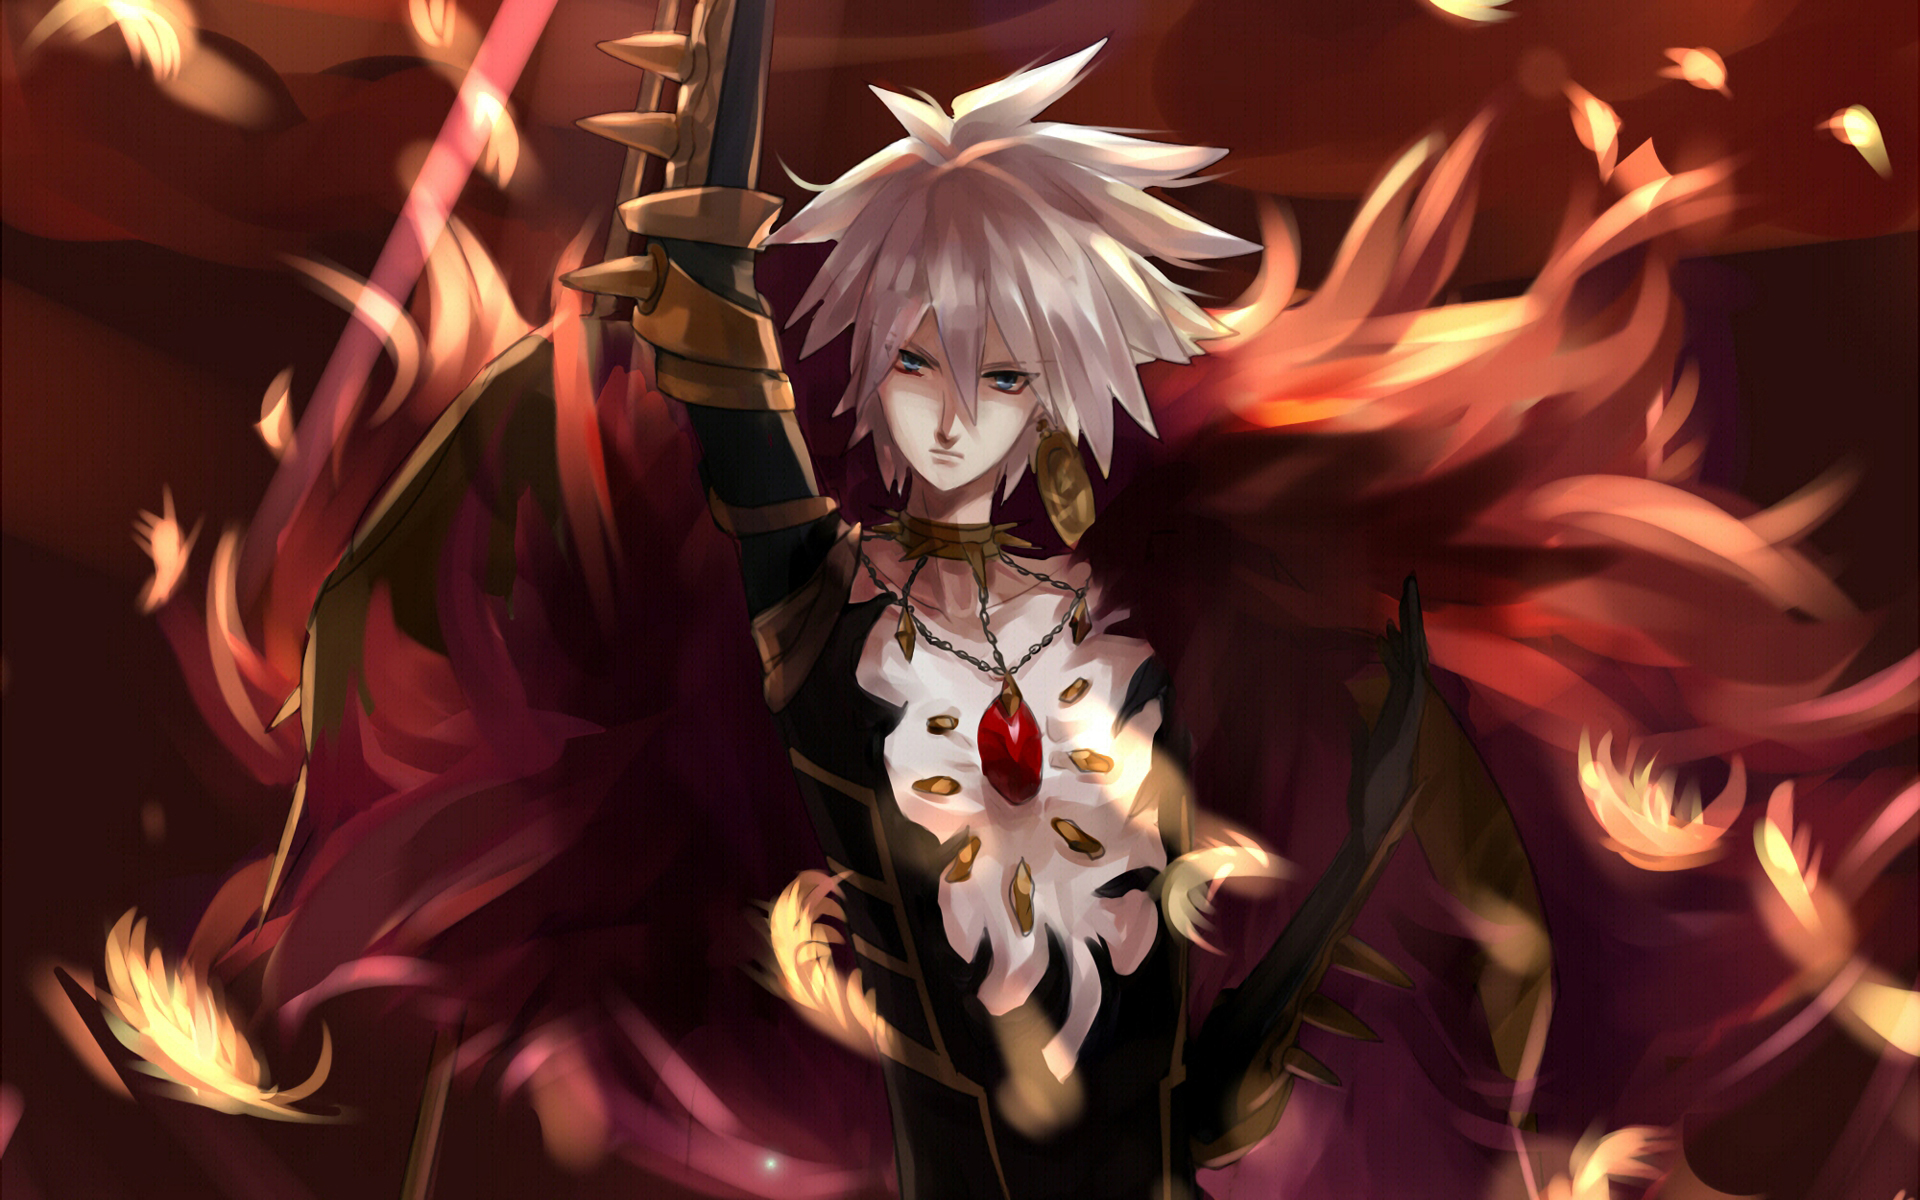 40 Lancer Of Red Fate Apocrypha Hd Wallpapers And Backgrounds